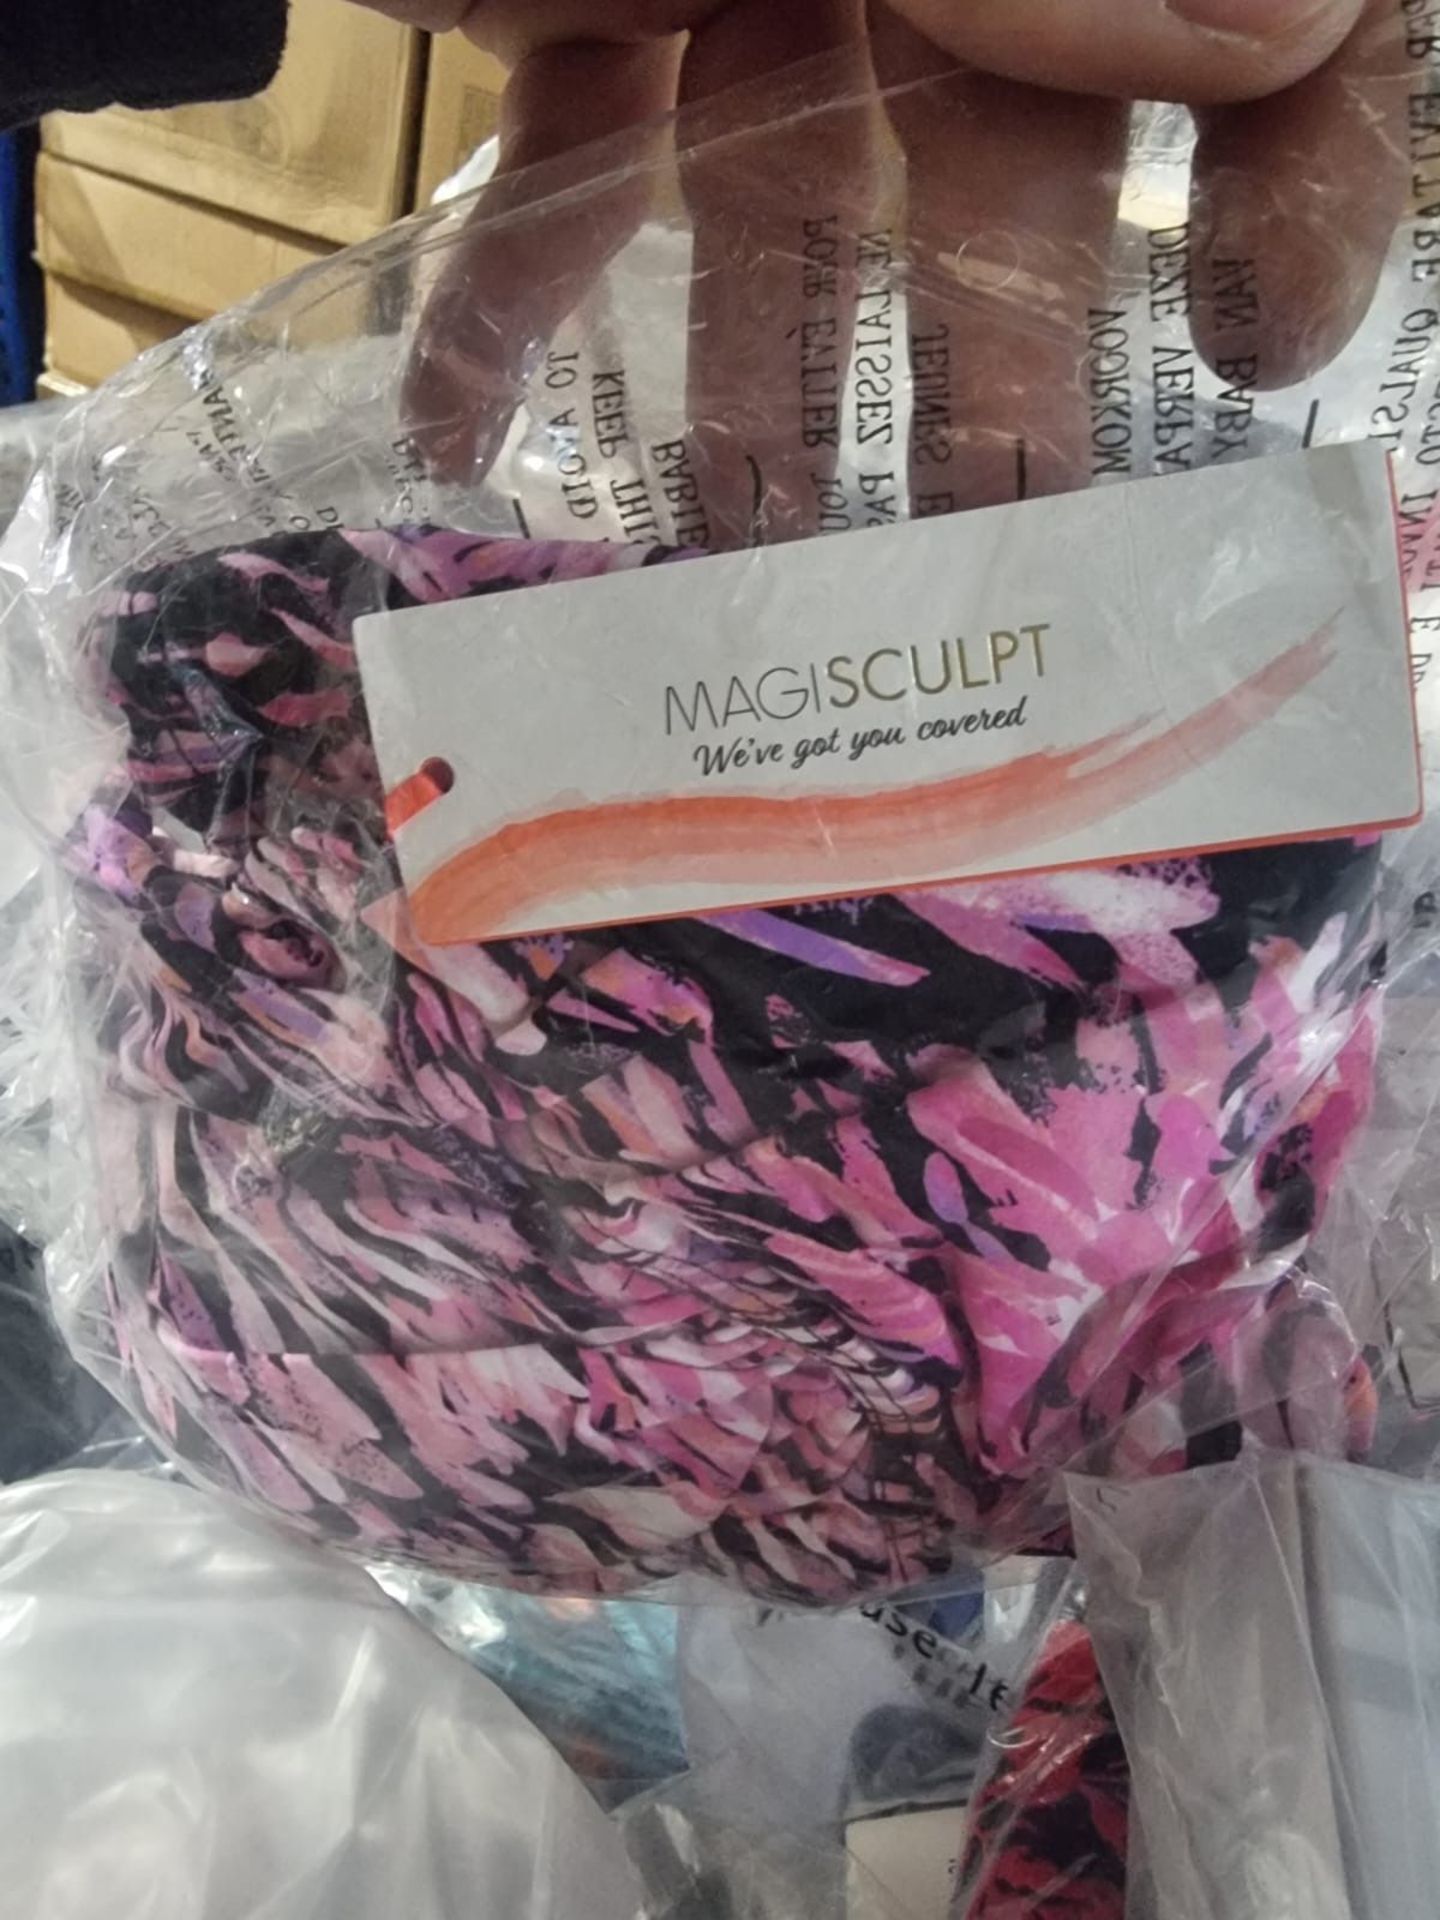 100 x NEW PACKAGED ASSORTED SWIM & UNDERWEAR FROM BRAND SUCH AS WONDERBRA, BOUX AVENUE, ANN SUMMERS, - Image 38 of 53